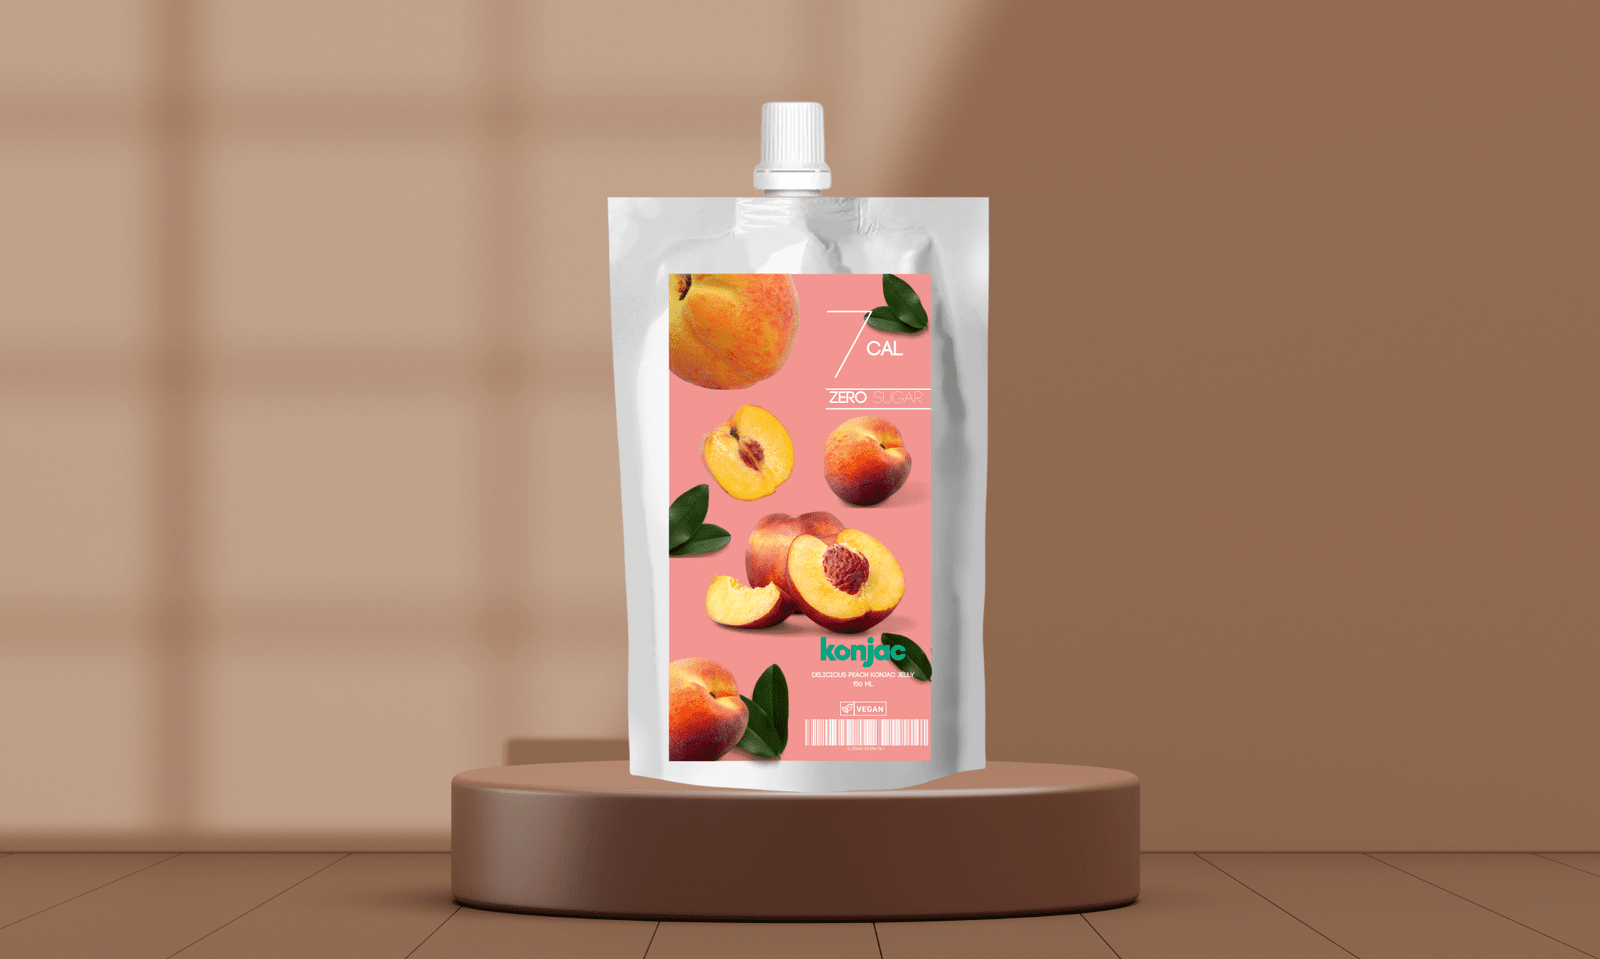 An image of Peach Konjac Jelly product pack